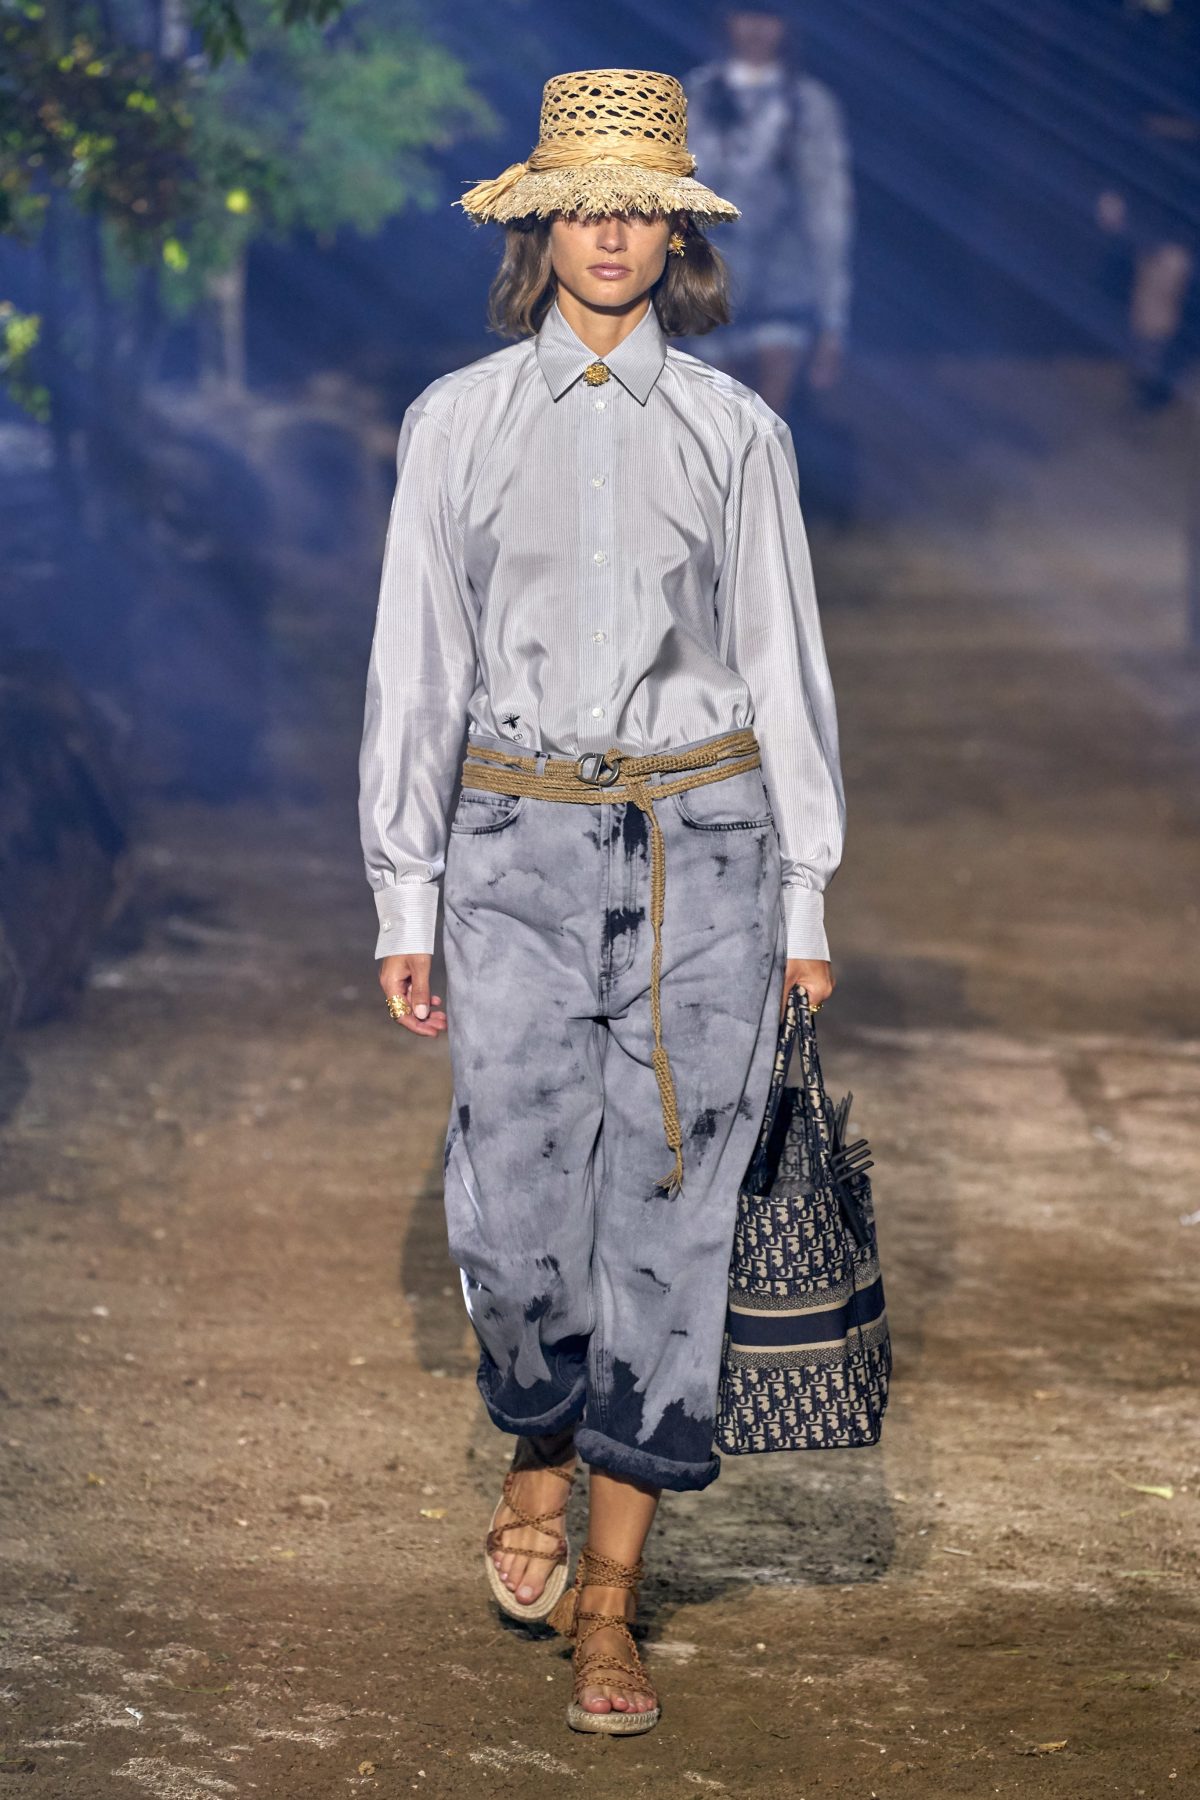 Christian Dior Spring 2020 Ready-to-Wear Fashion Show Details: See